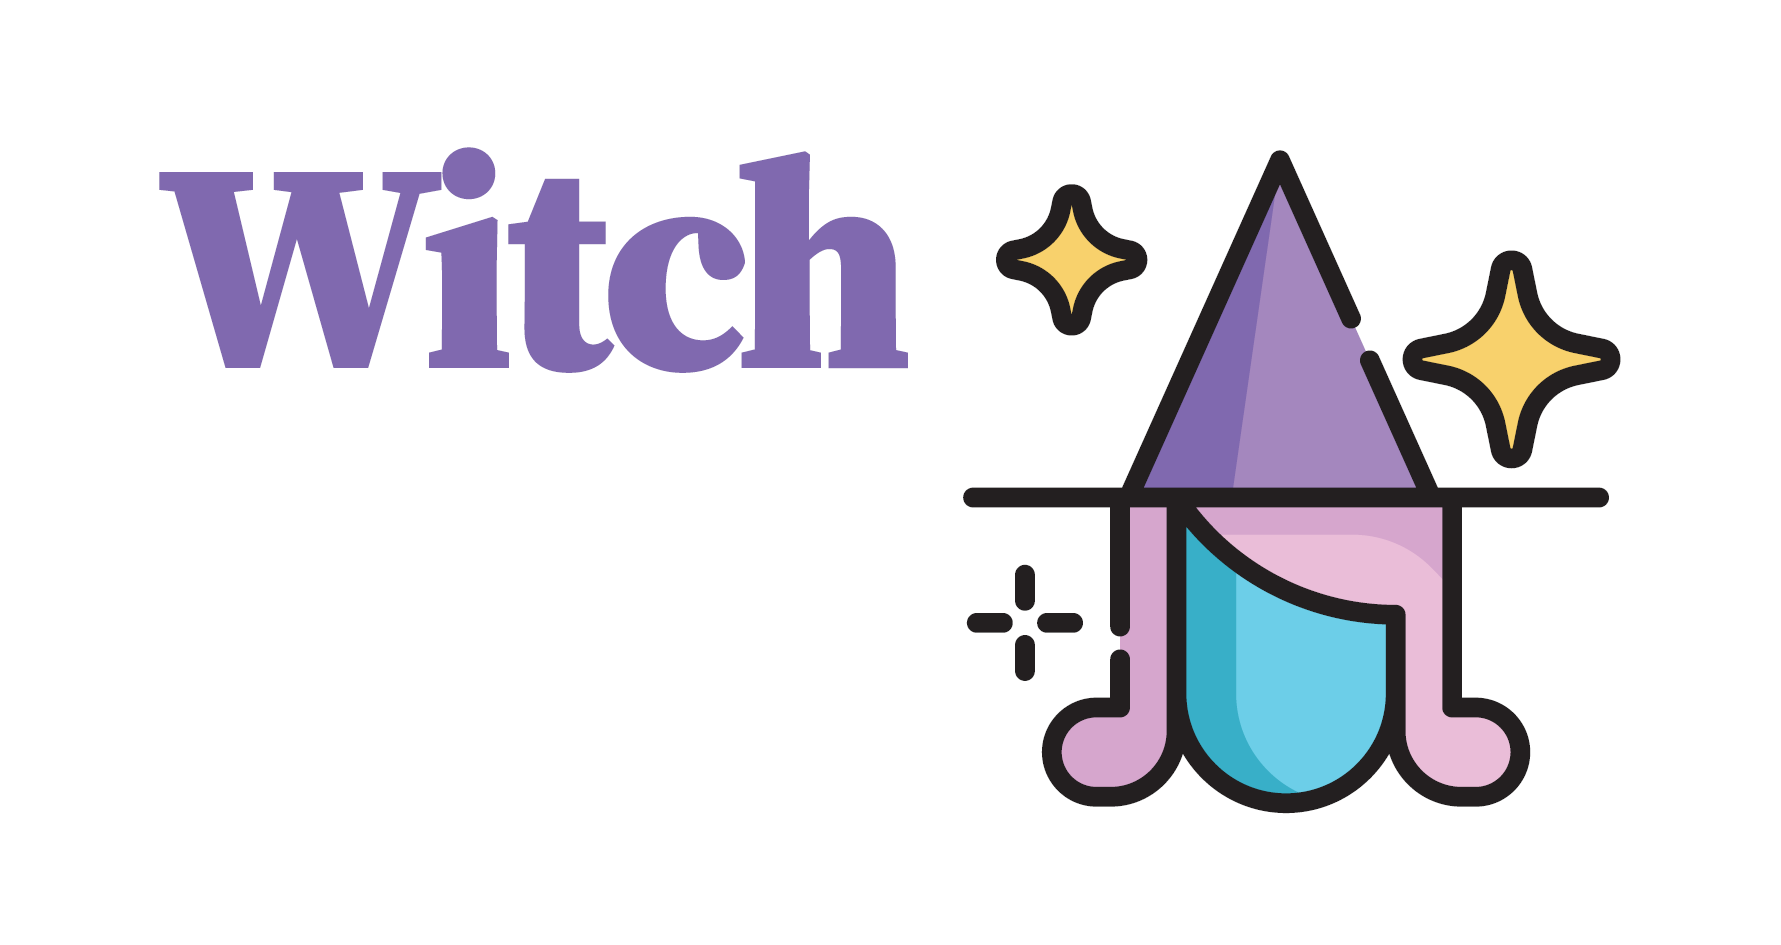 An introduction to Witch